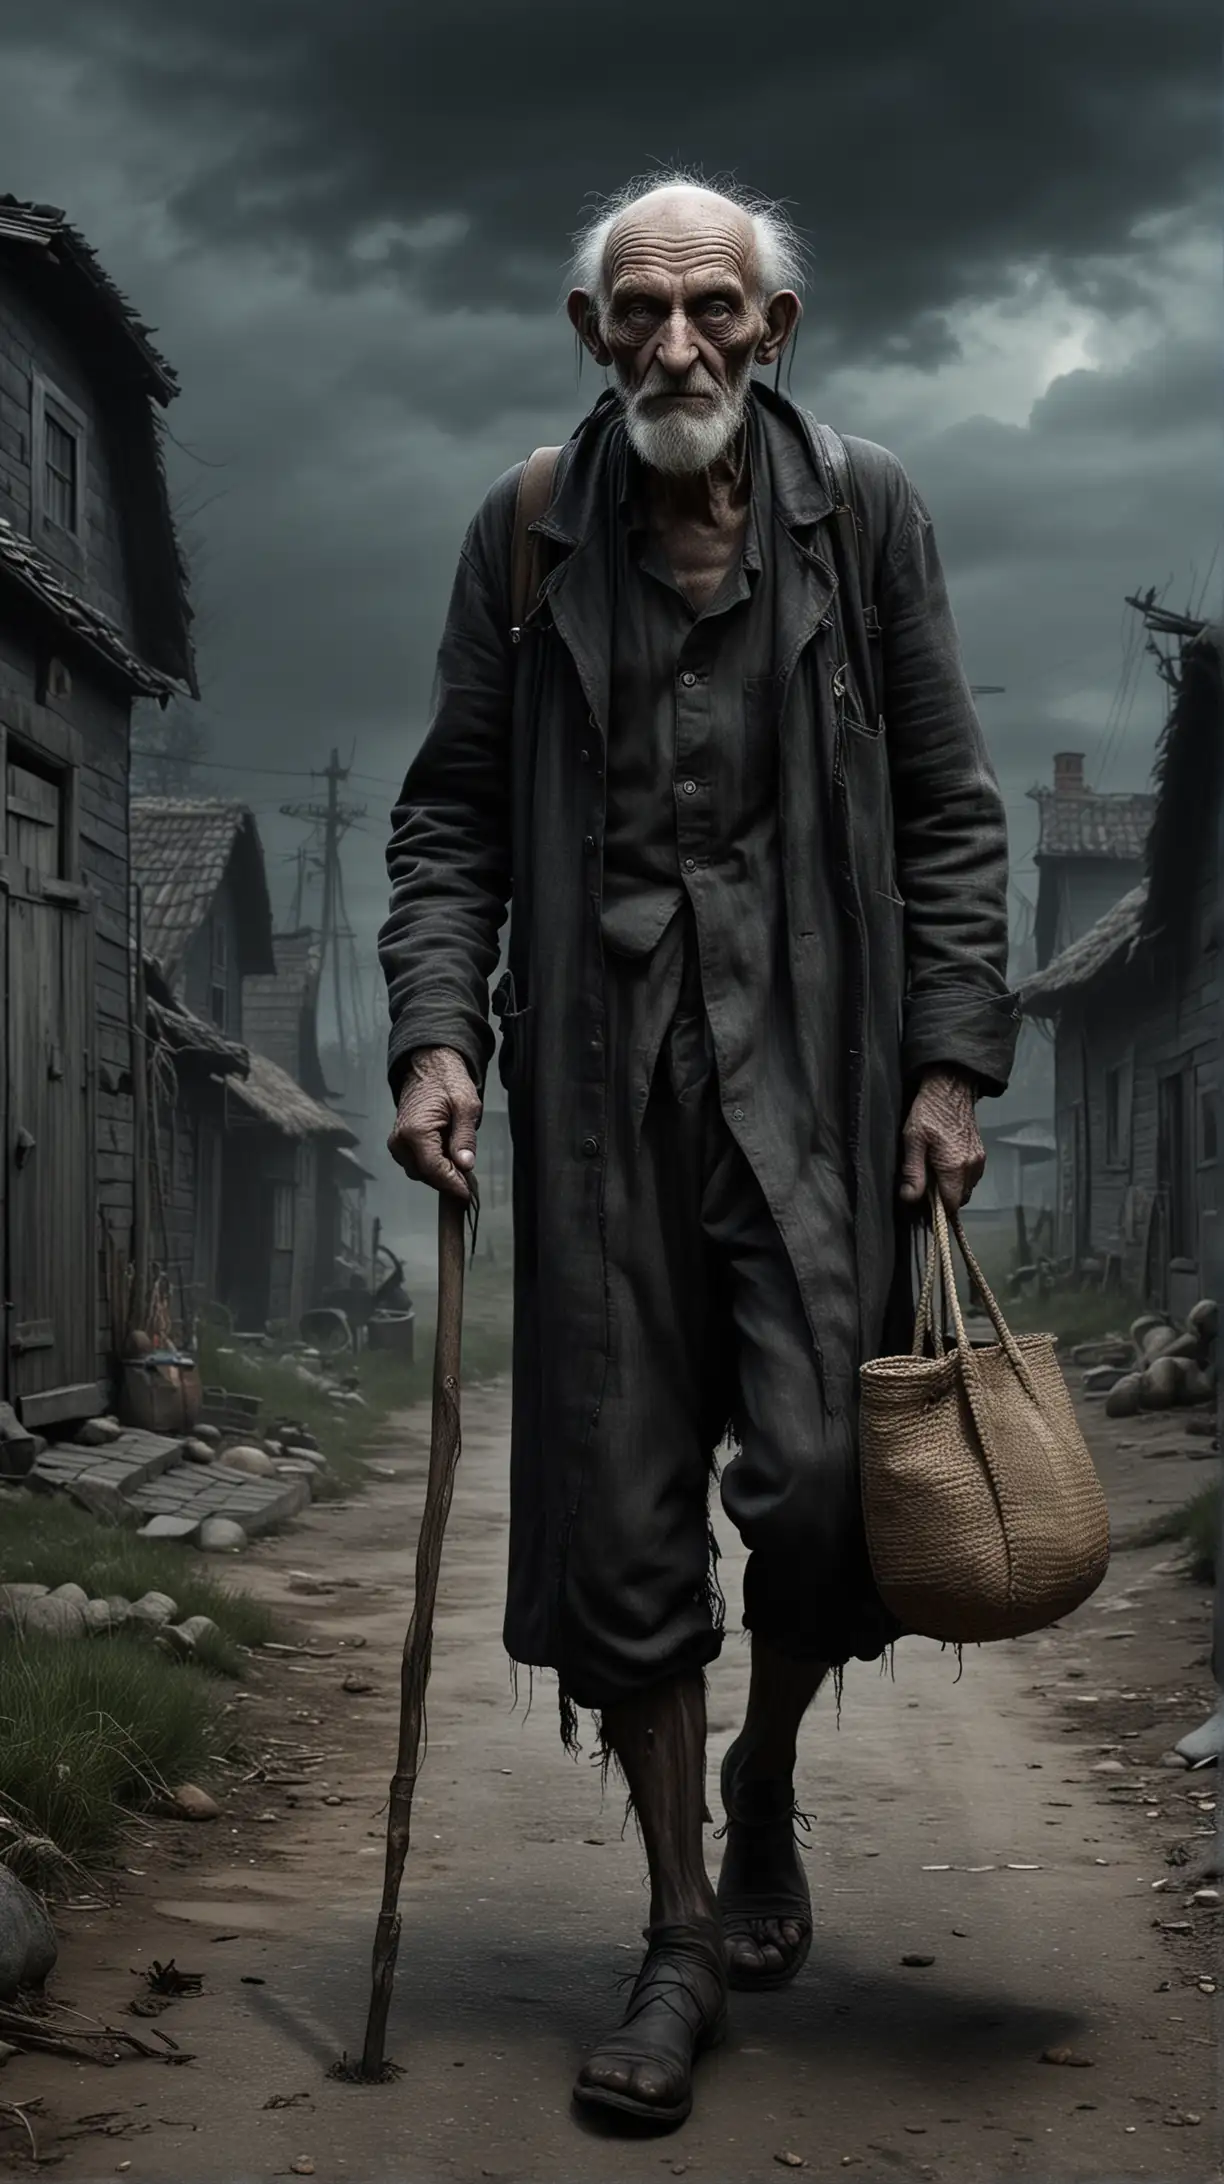 Sinister Old Man with Bag and Cane in Dark Horror Village